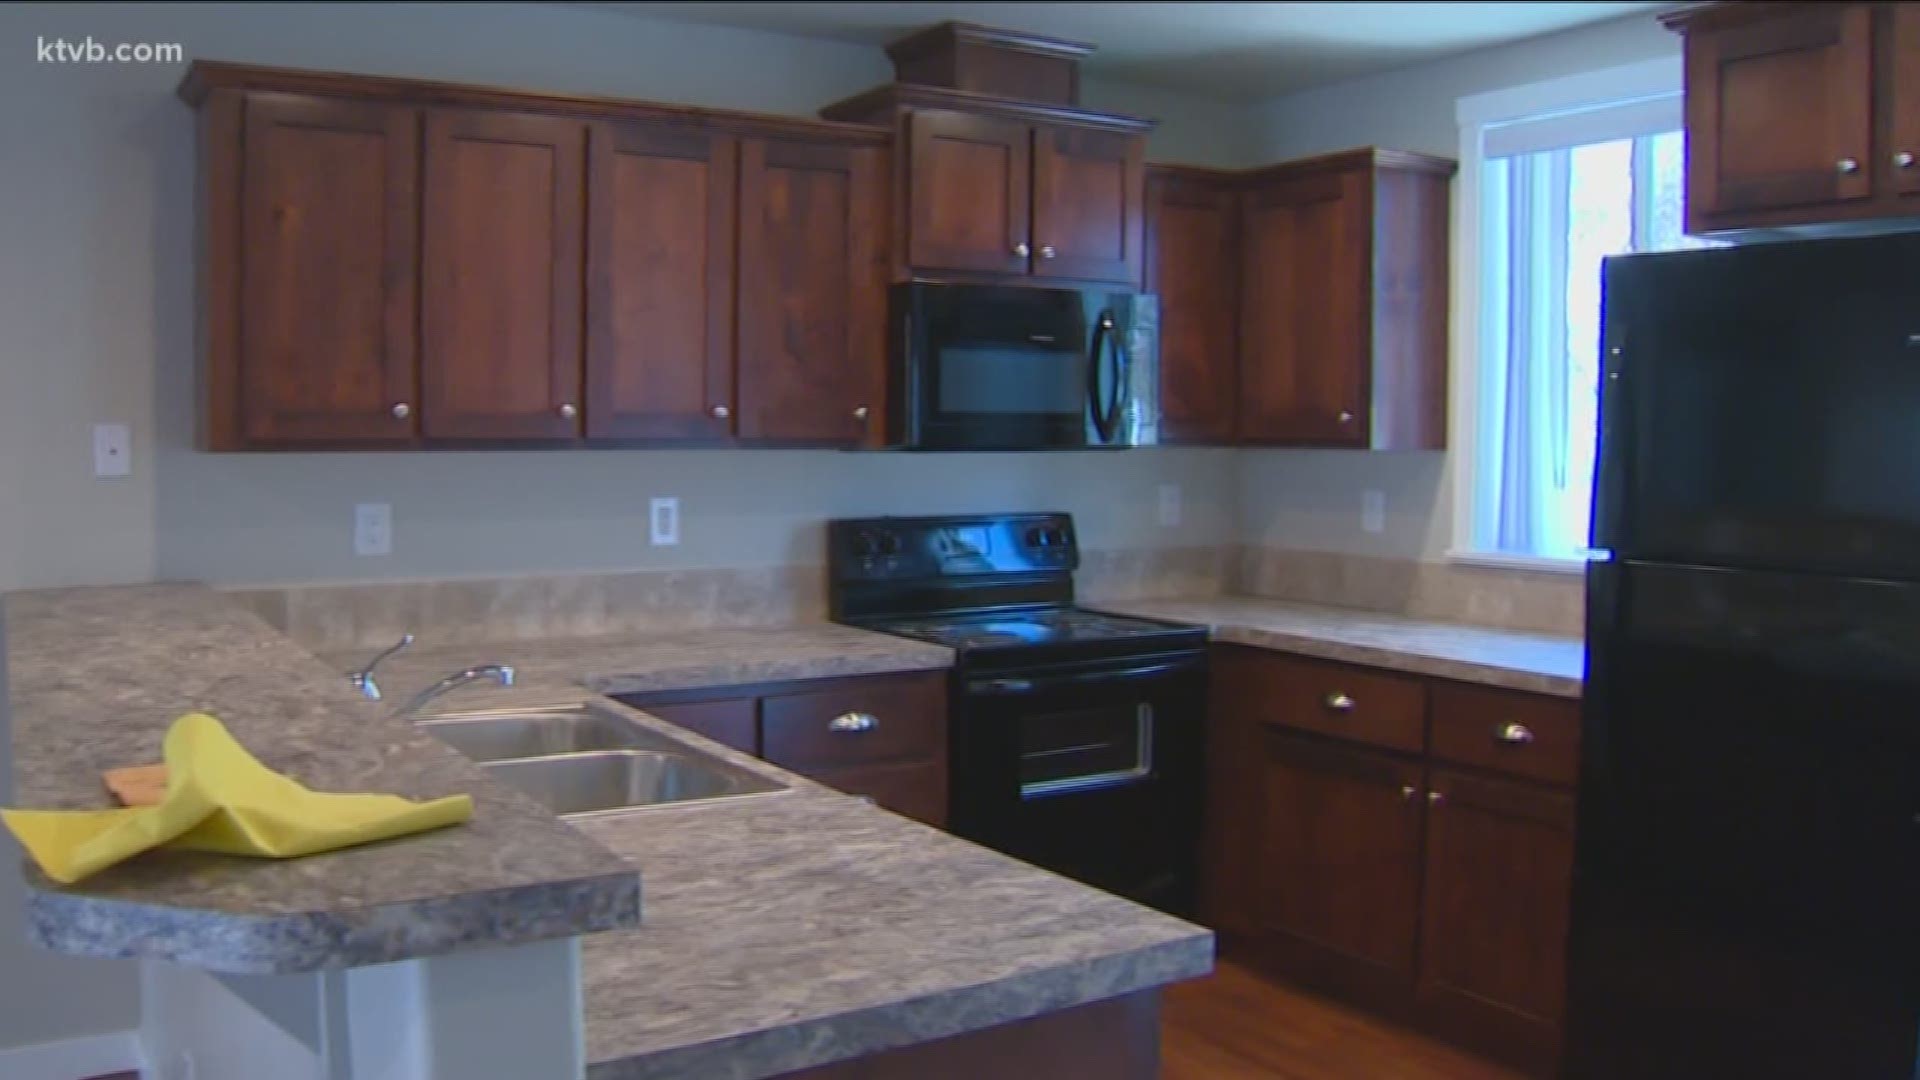 Mayor Bieter said he will not recommend creating new policies to regulate short-term rentals in Boise.